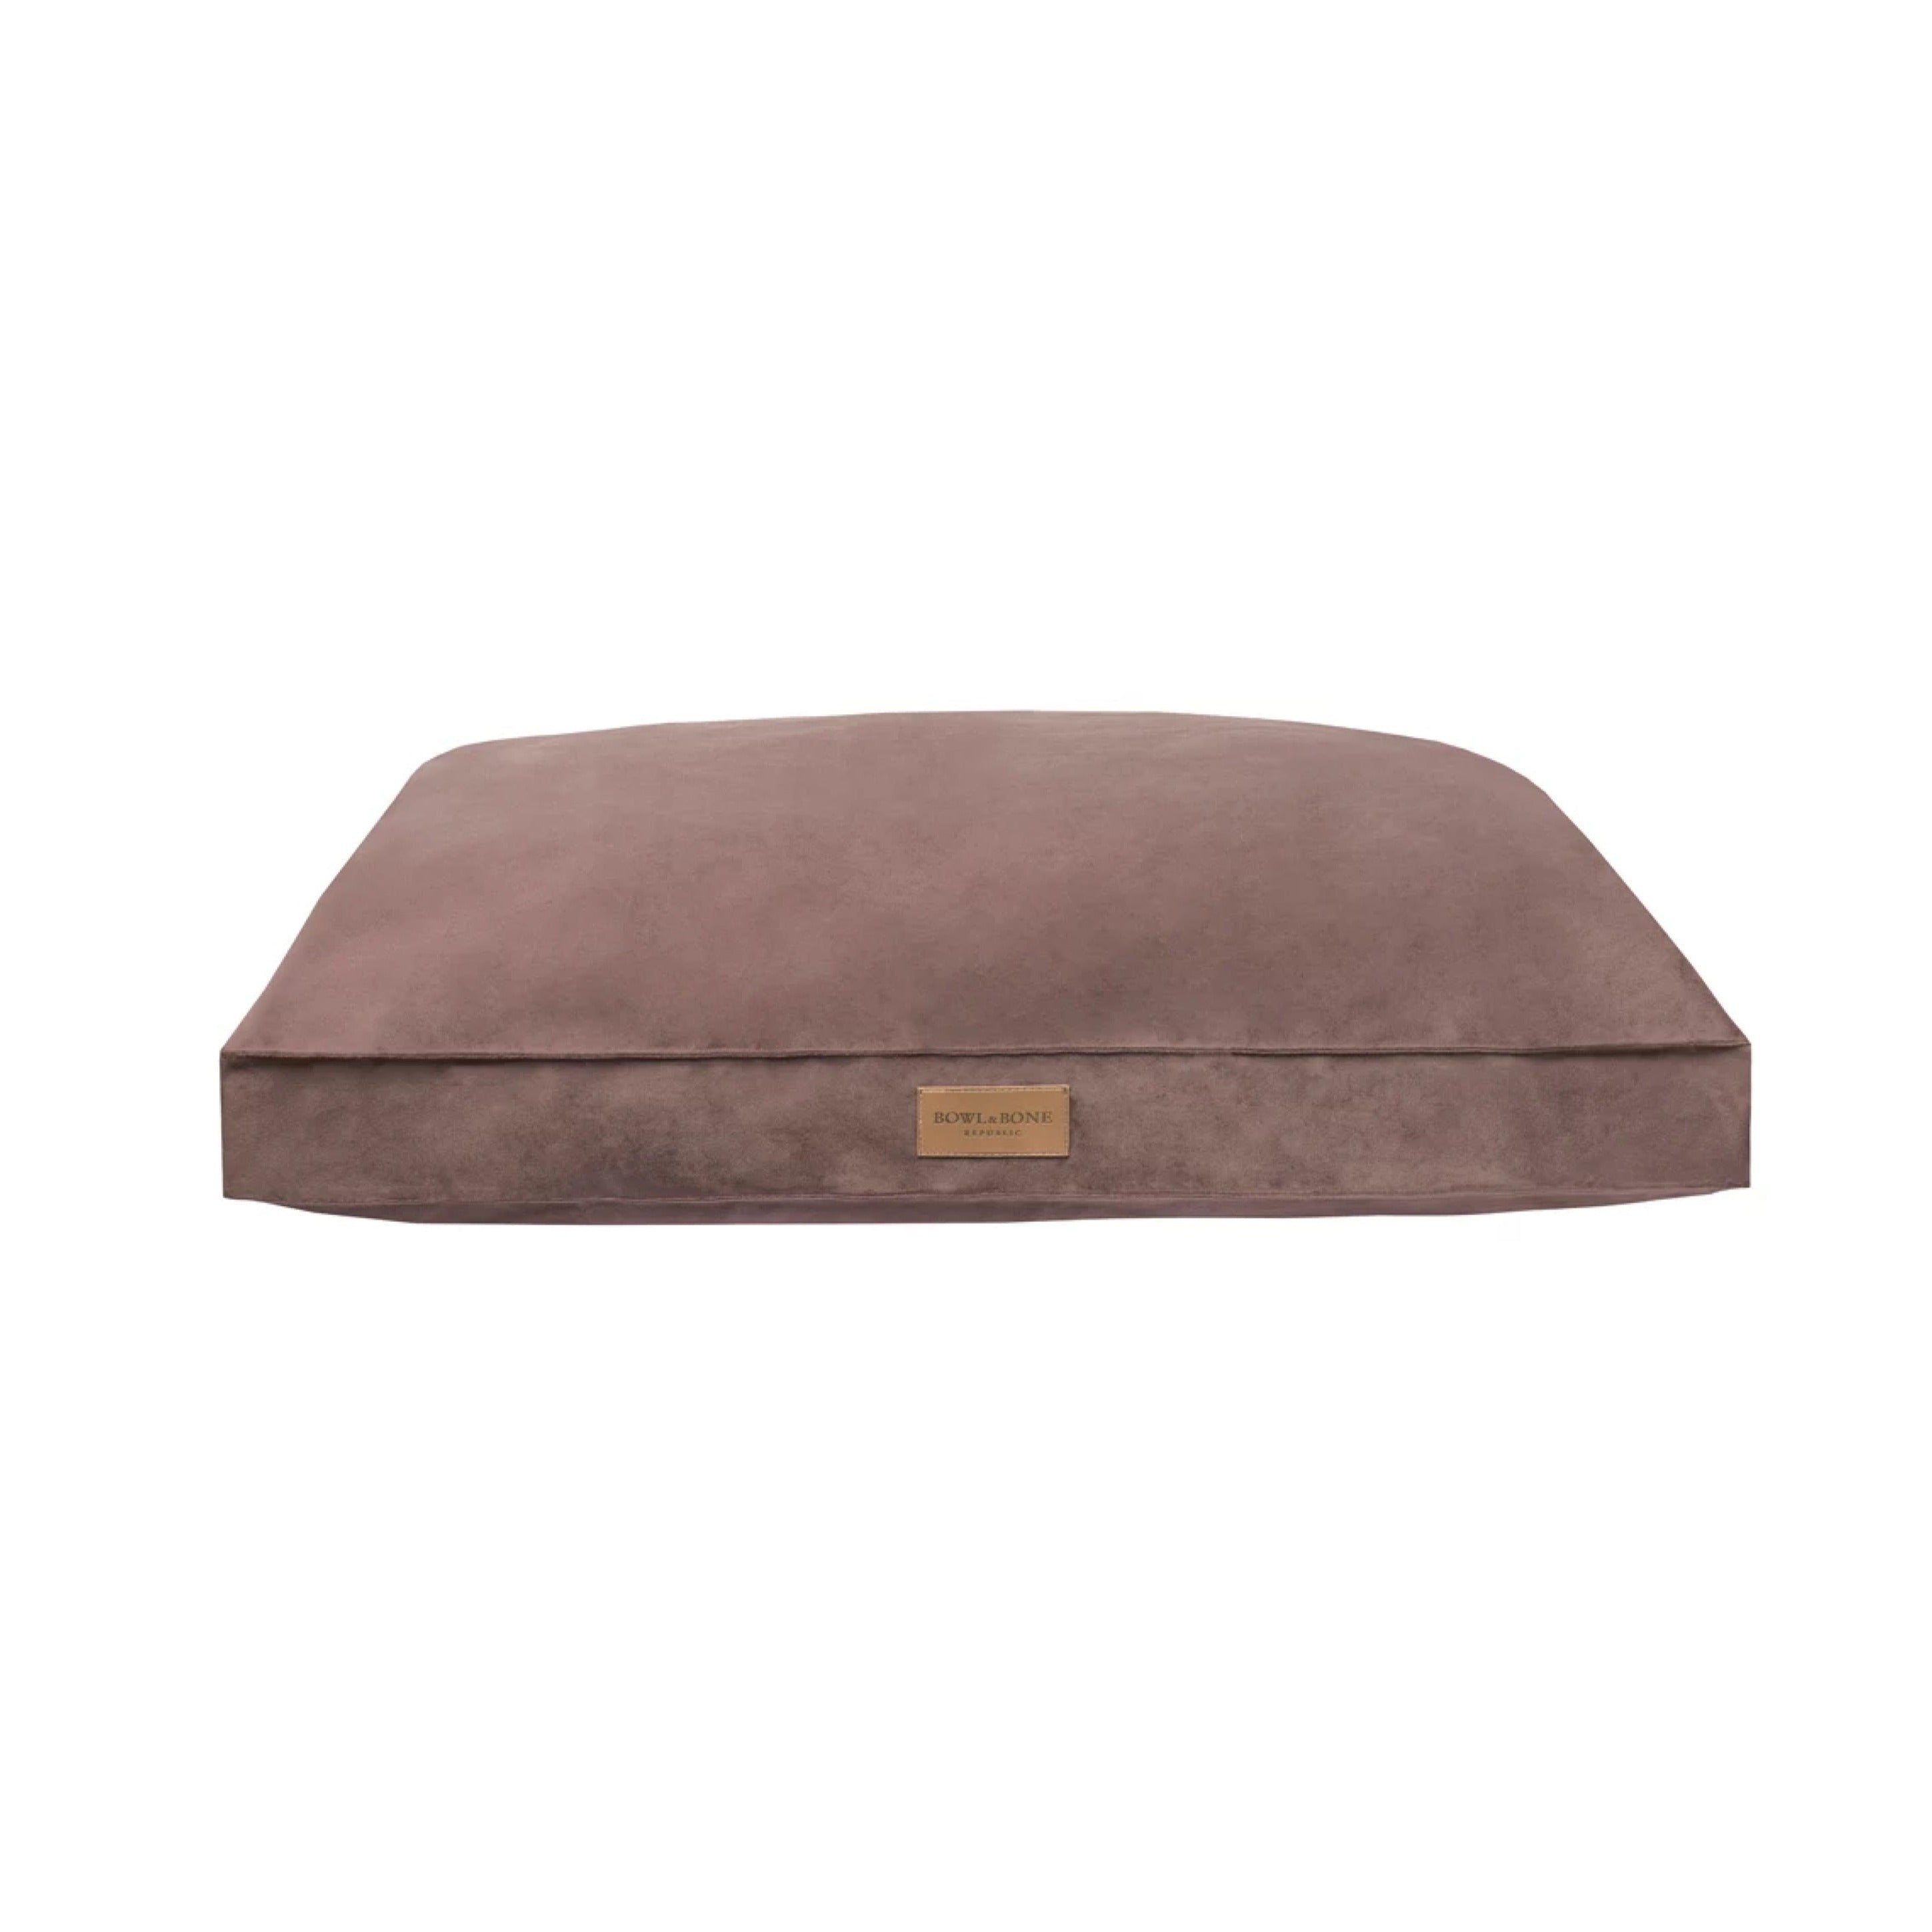 Cushion Bed Classic Brown from Bowl&Bone